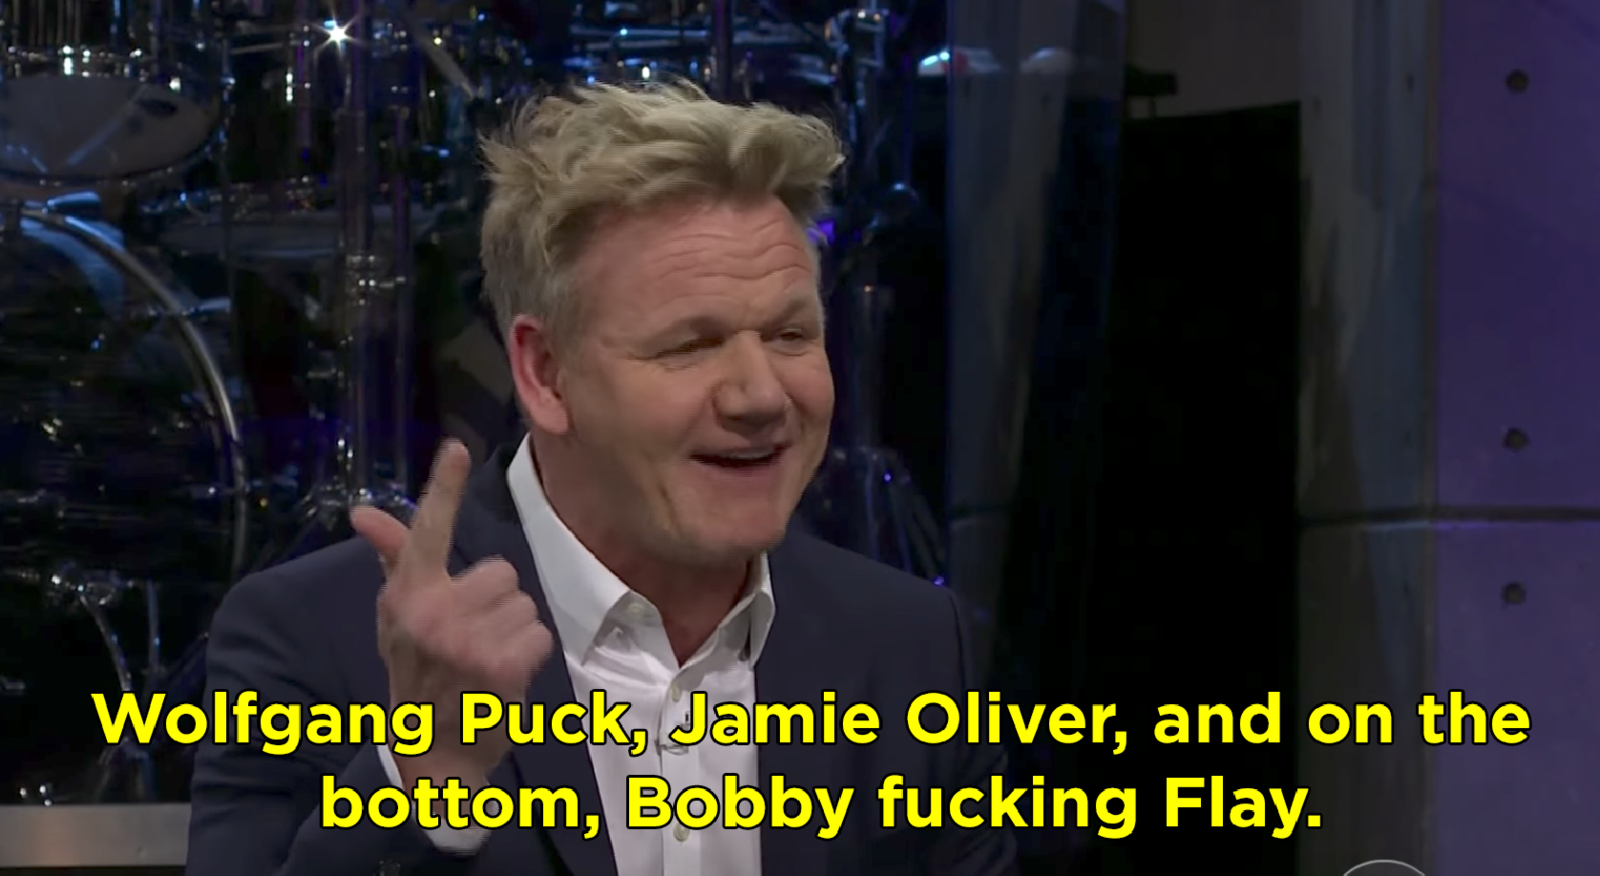 Gordon said Wolfgang Puck, Jamie Oliver, and then Bobby Flay